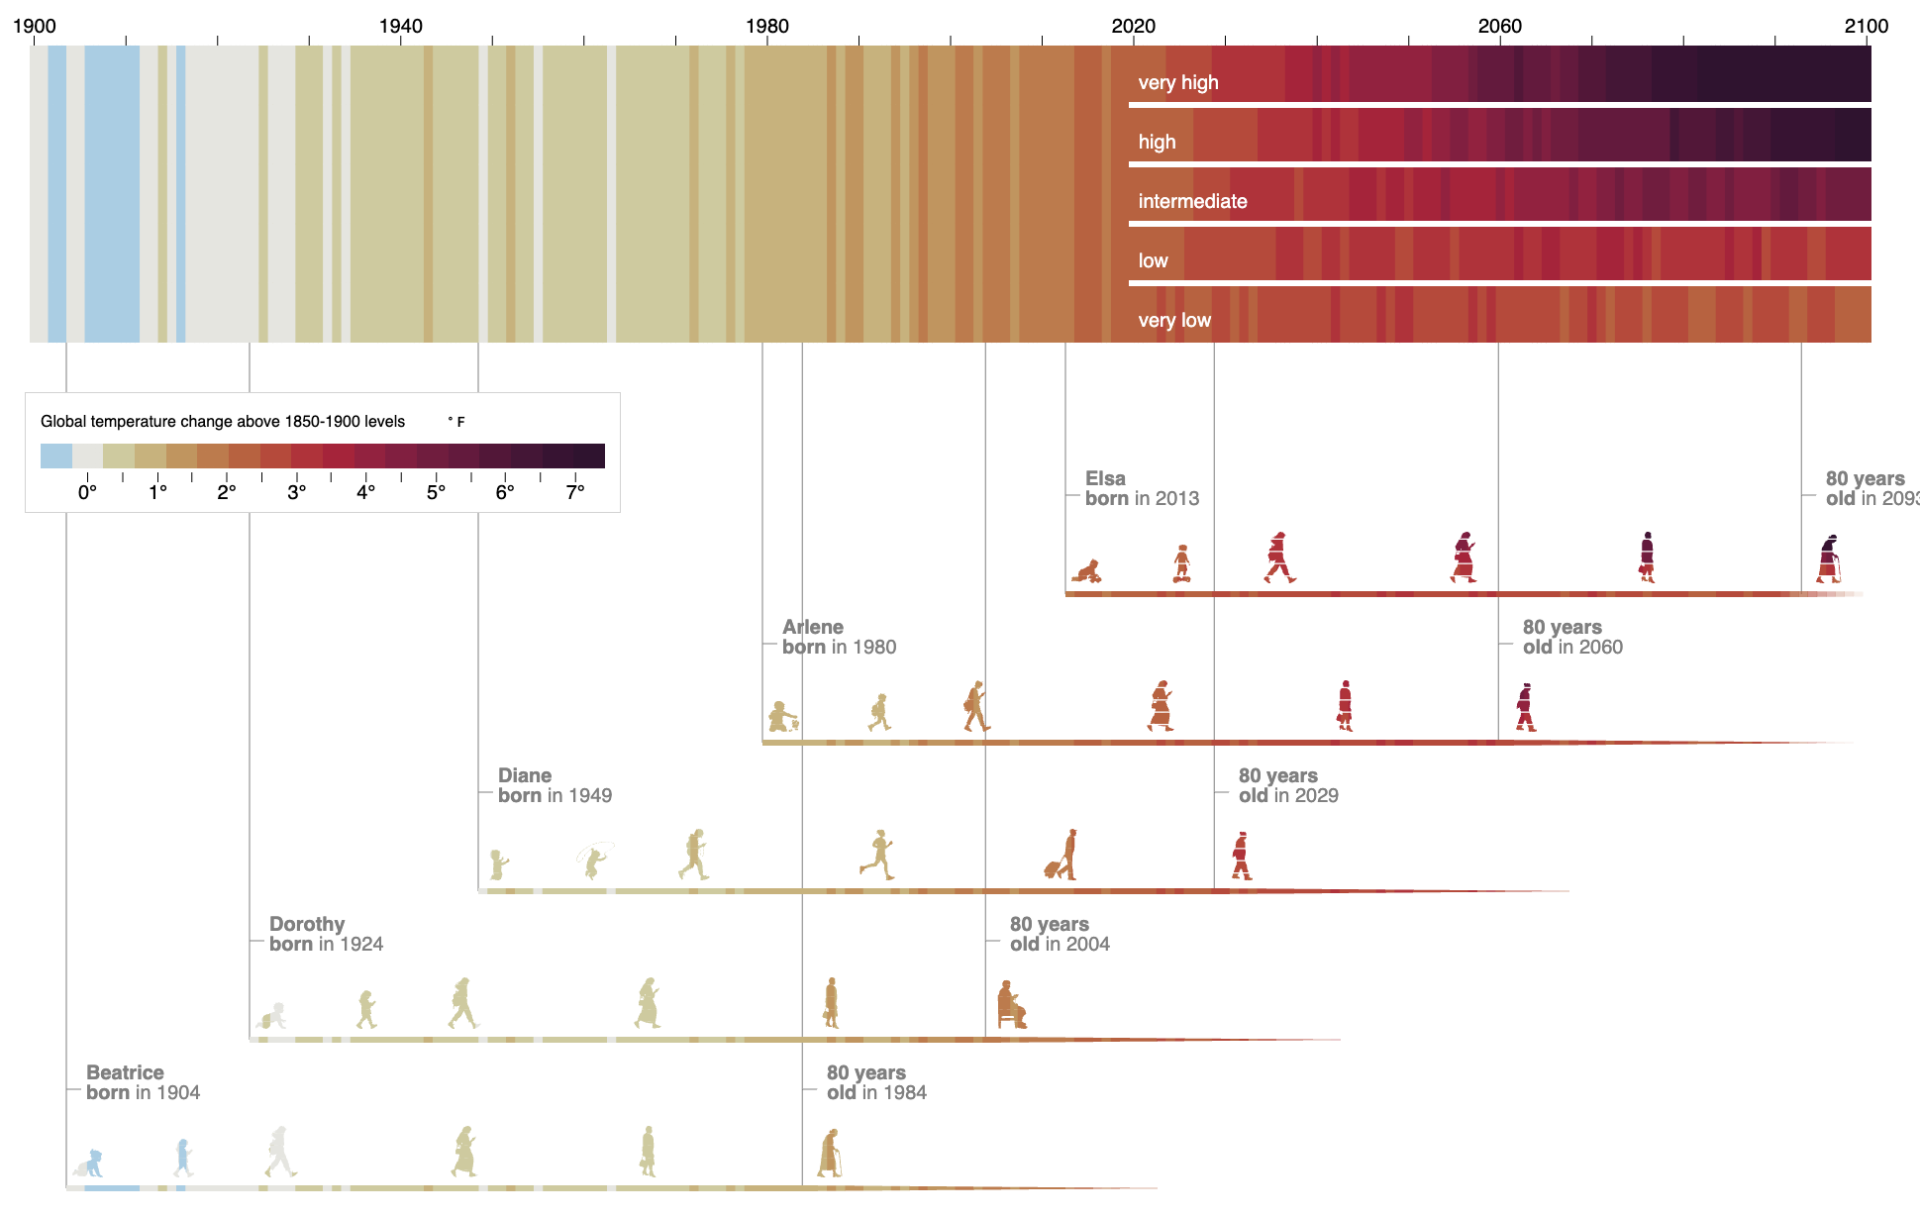 Generations of the Birt family in climate stripes created using the NASA Climate Legacies tool